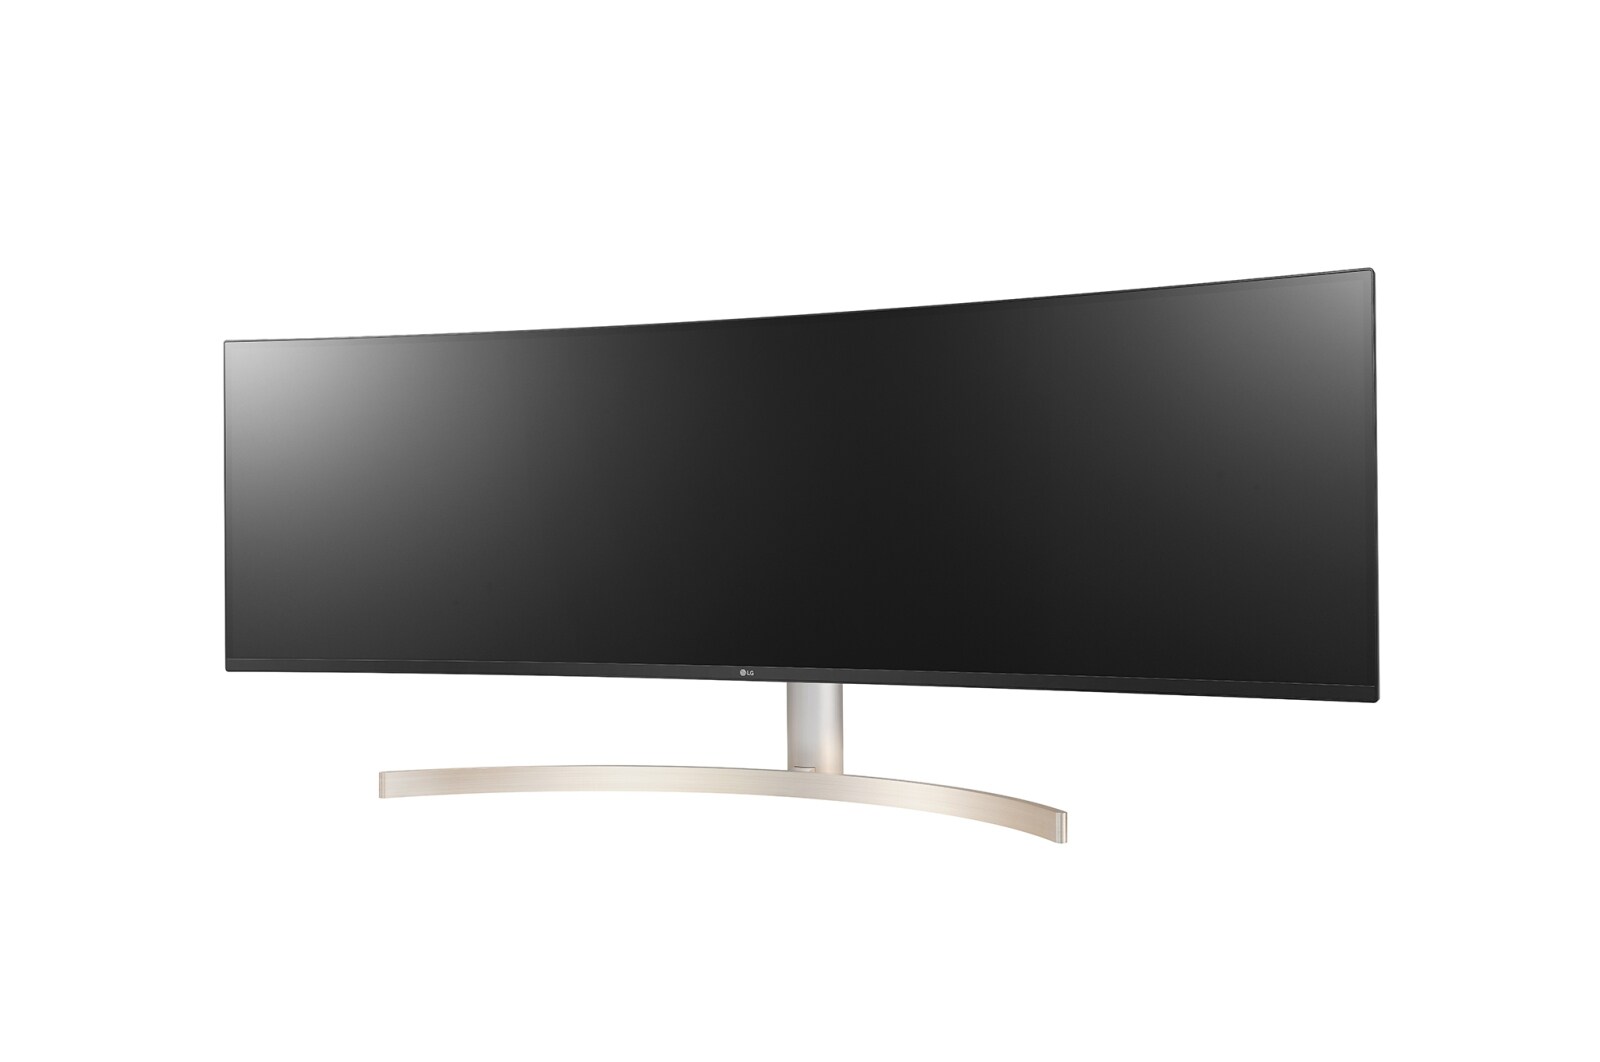 LG 49BL95C-WE 49" 5120x1440 IPS LCD Curved Monitor